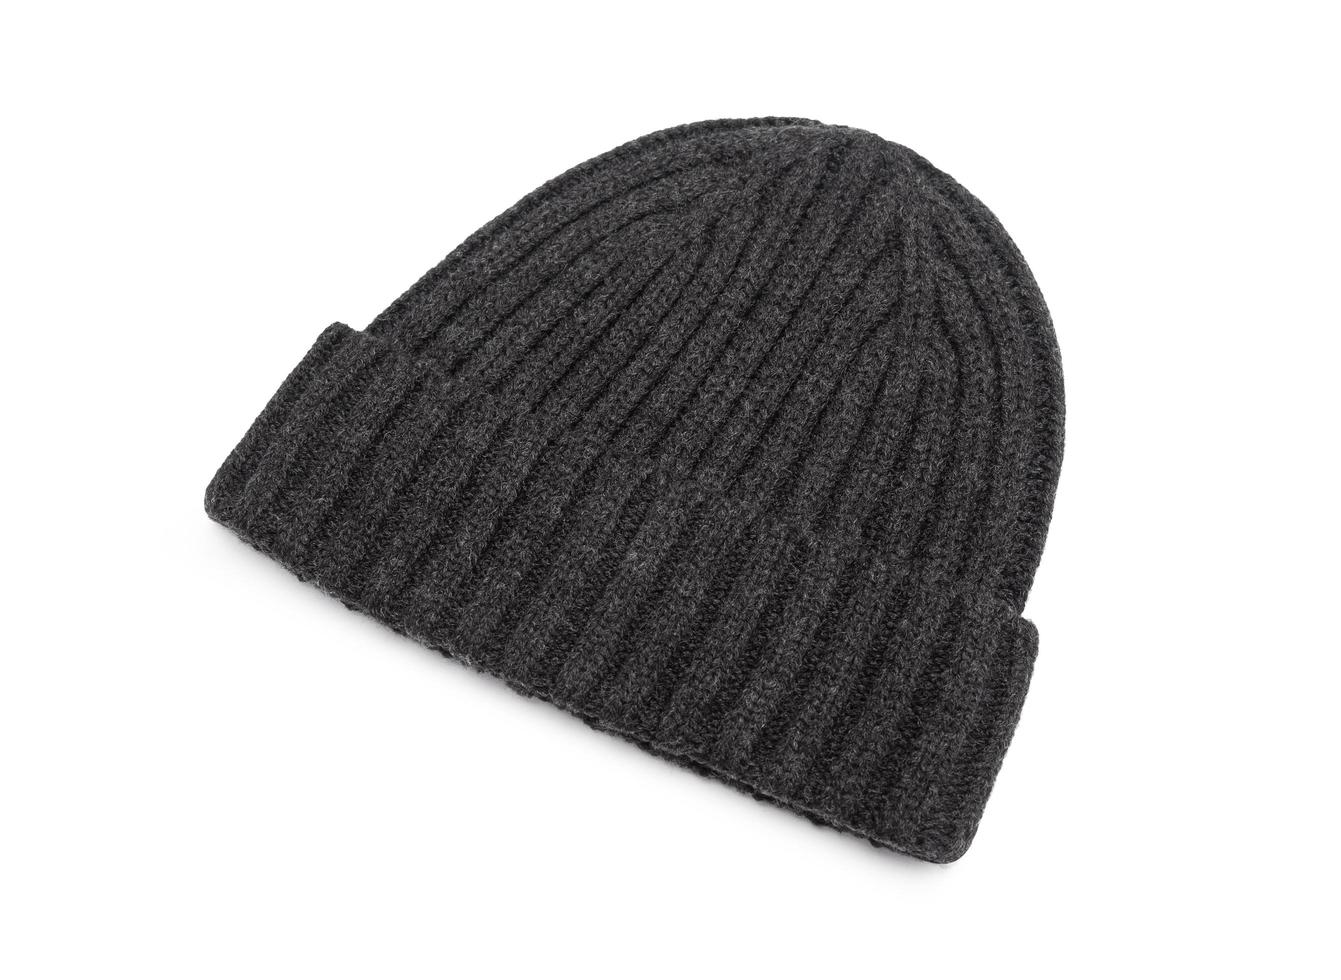 Black beanie isolated on white background with clipping path photo